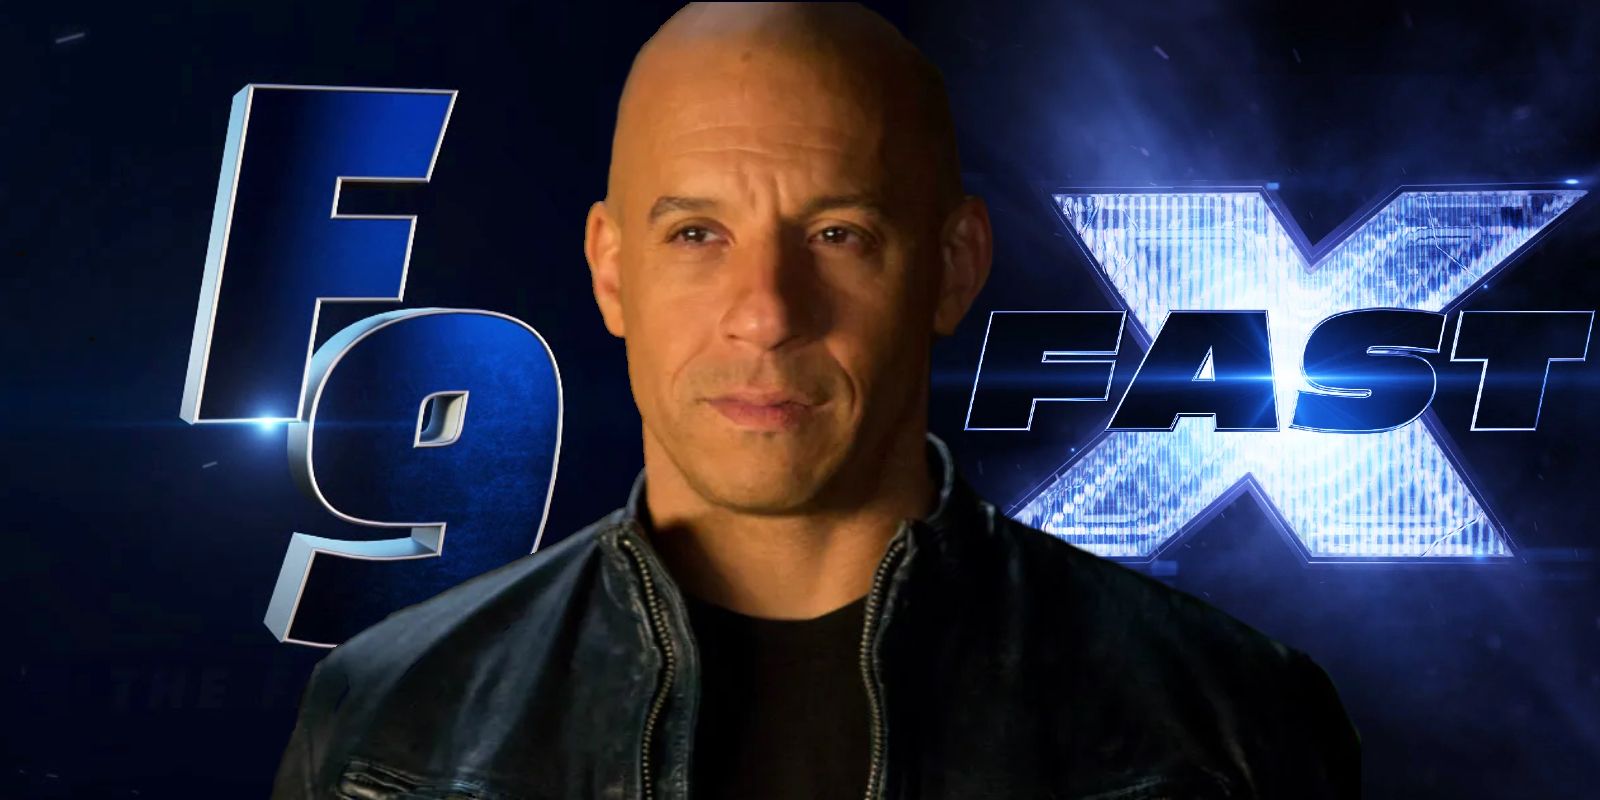 Why Do Fast &Furious Movies Have So Many Different Titles?